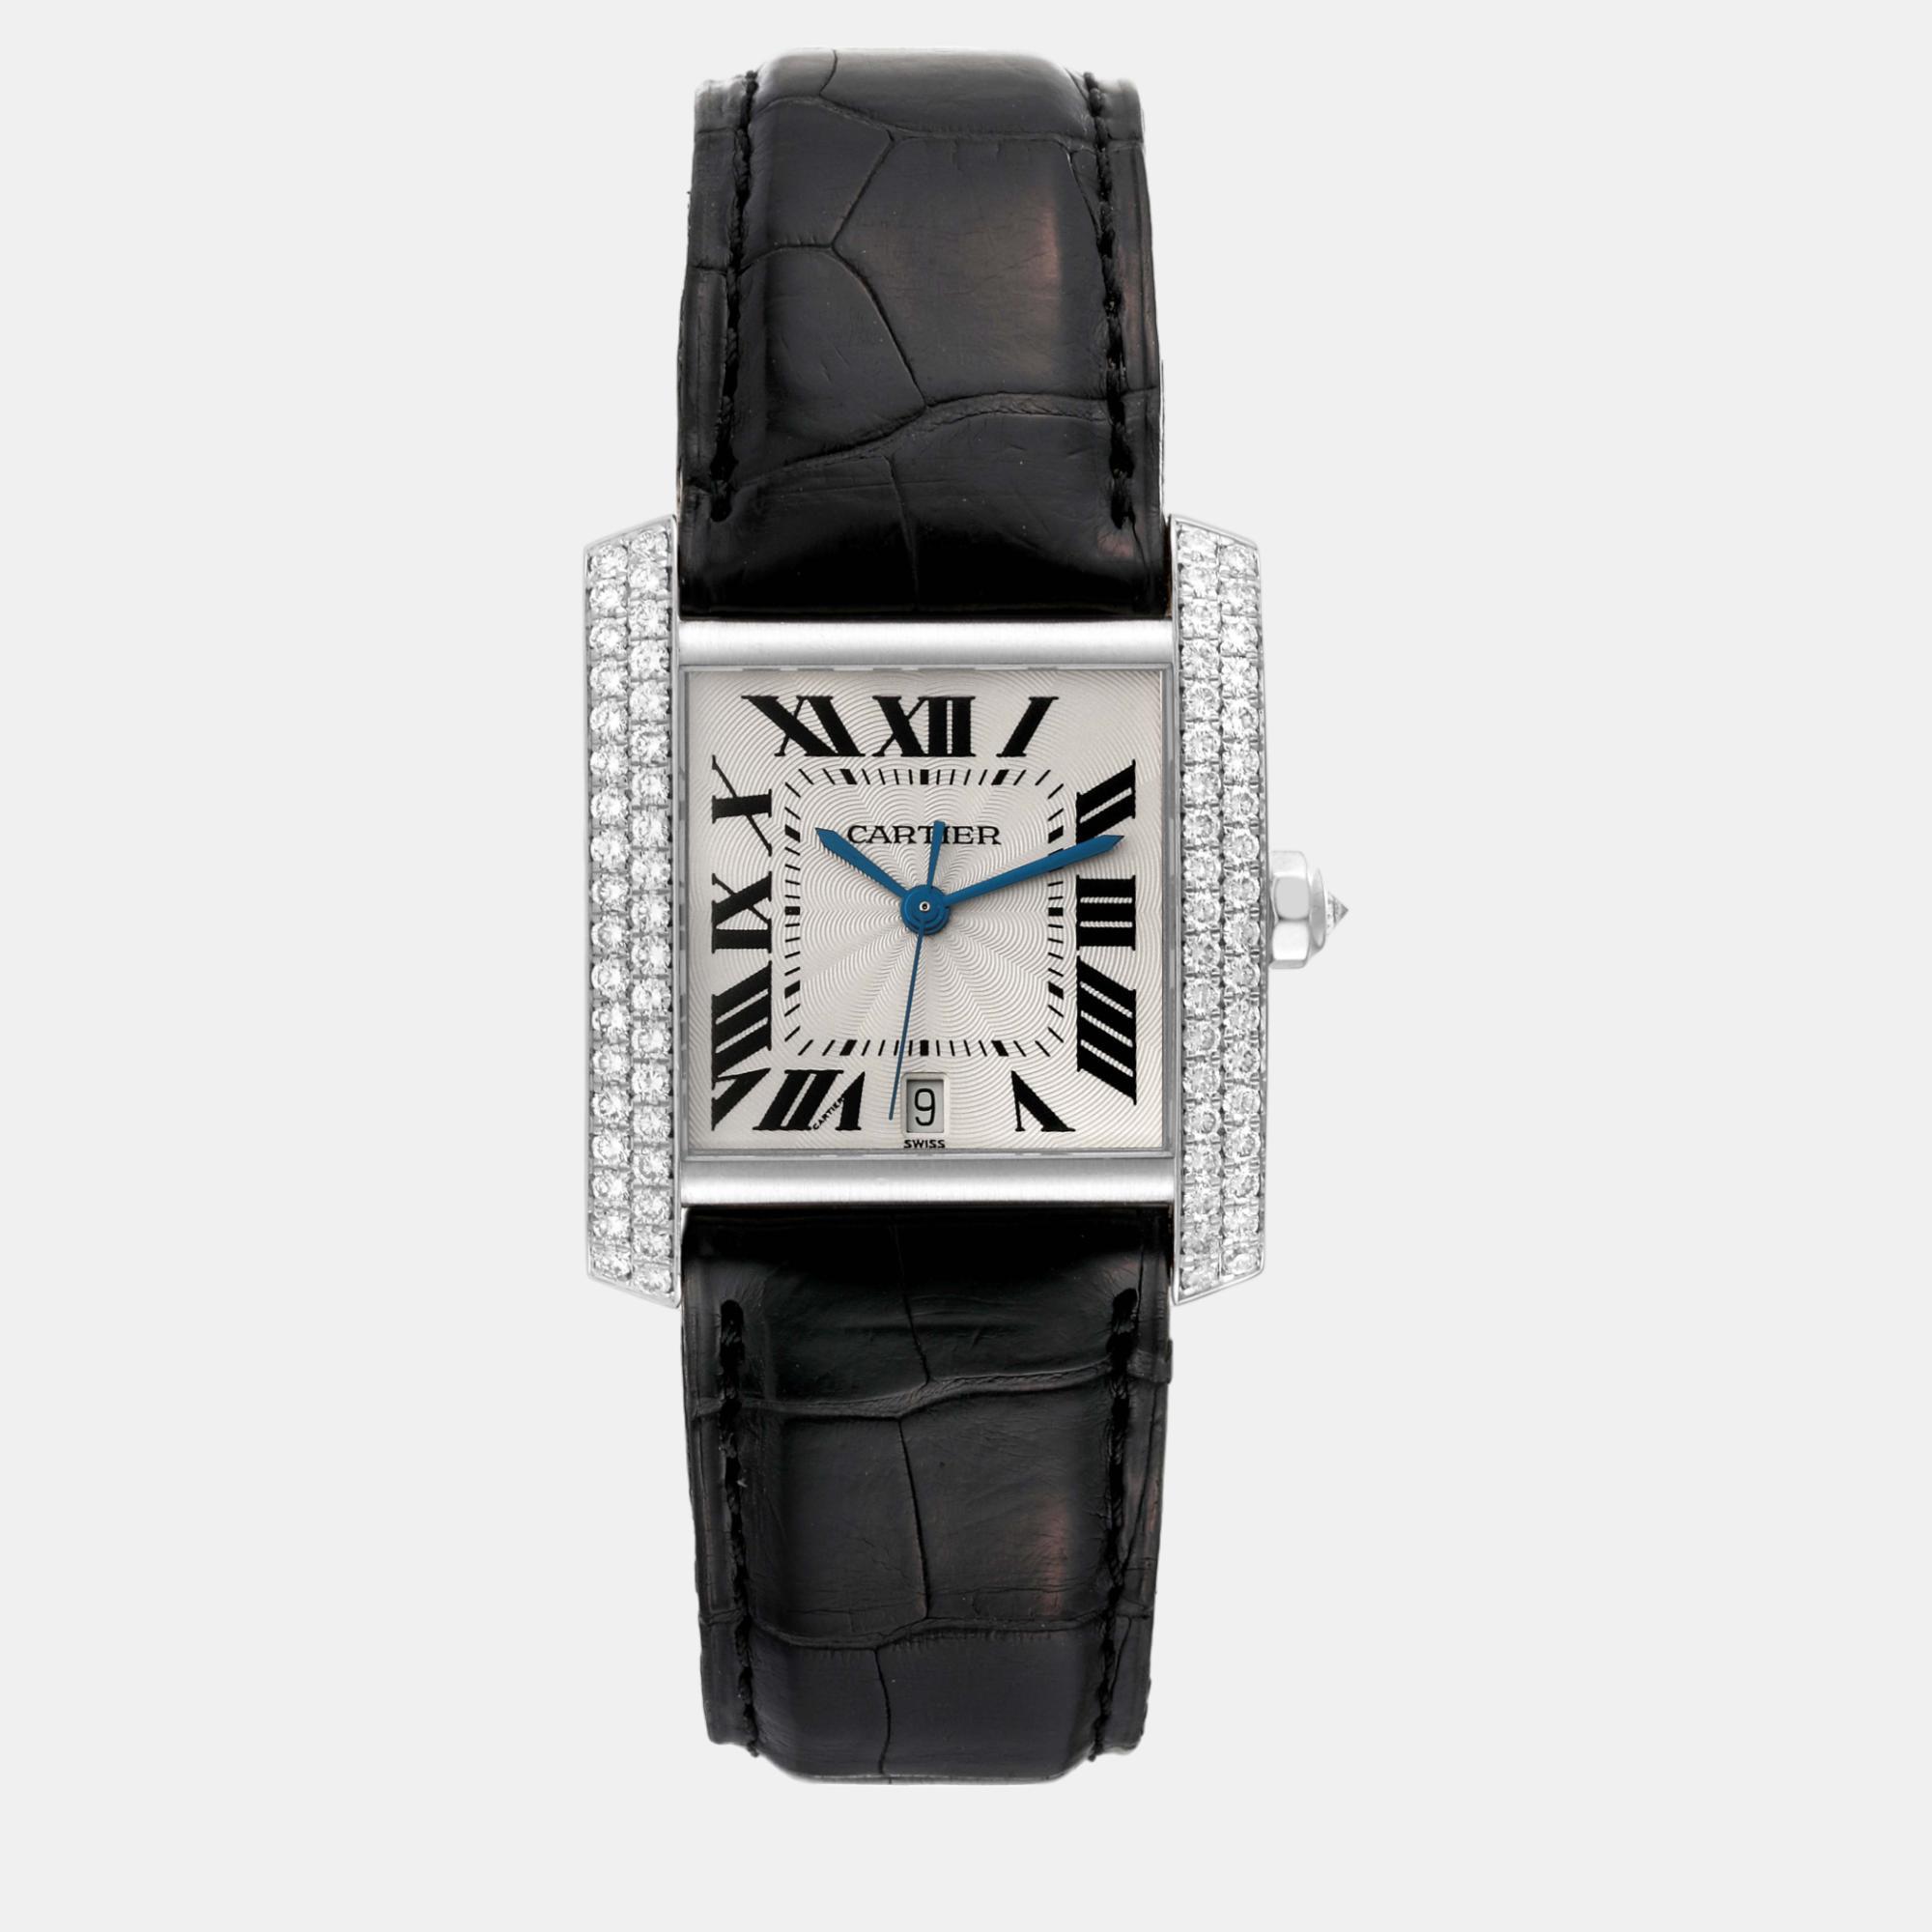 Cartier tank francaise large white gold diamond mens watch 2366 28 mm x 32 mm